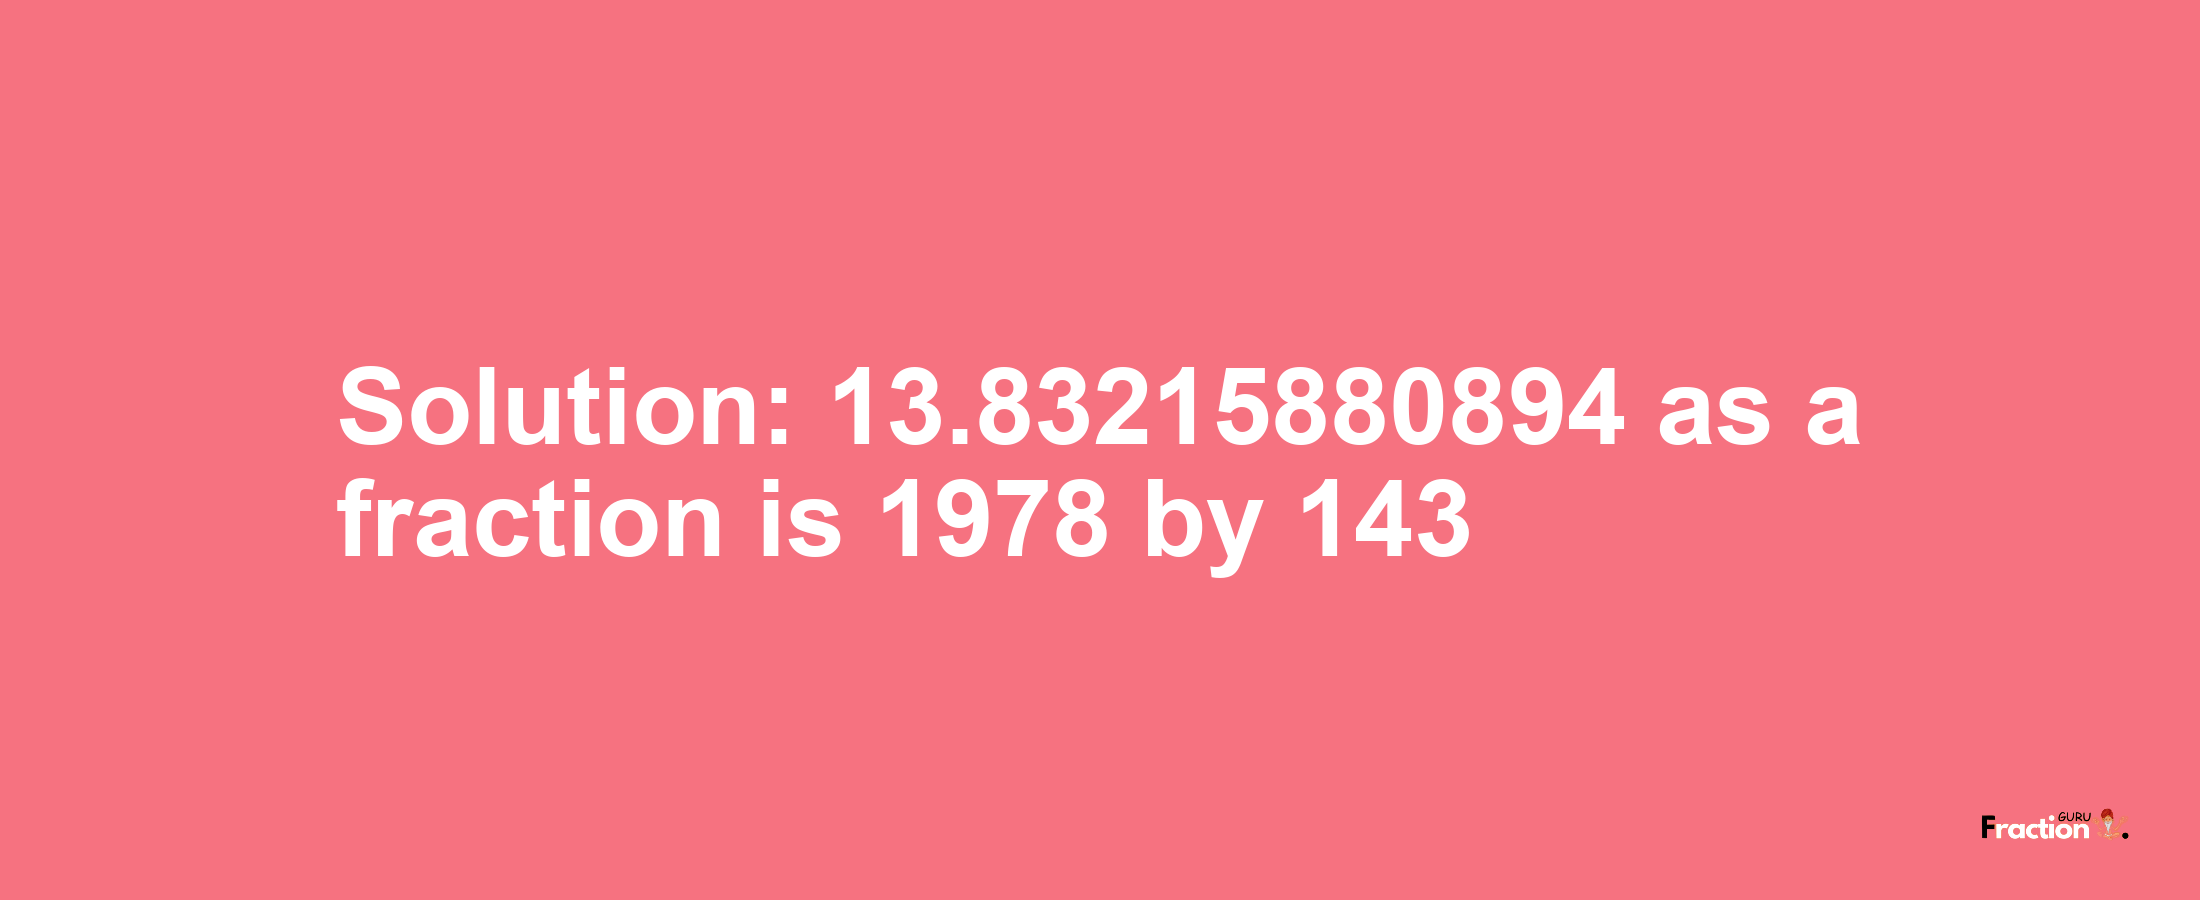 Solution:13.83215880894 as a fraction is 1978/143